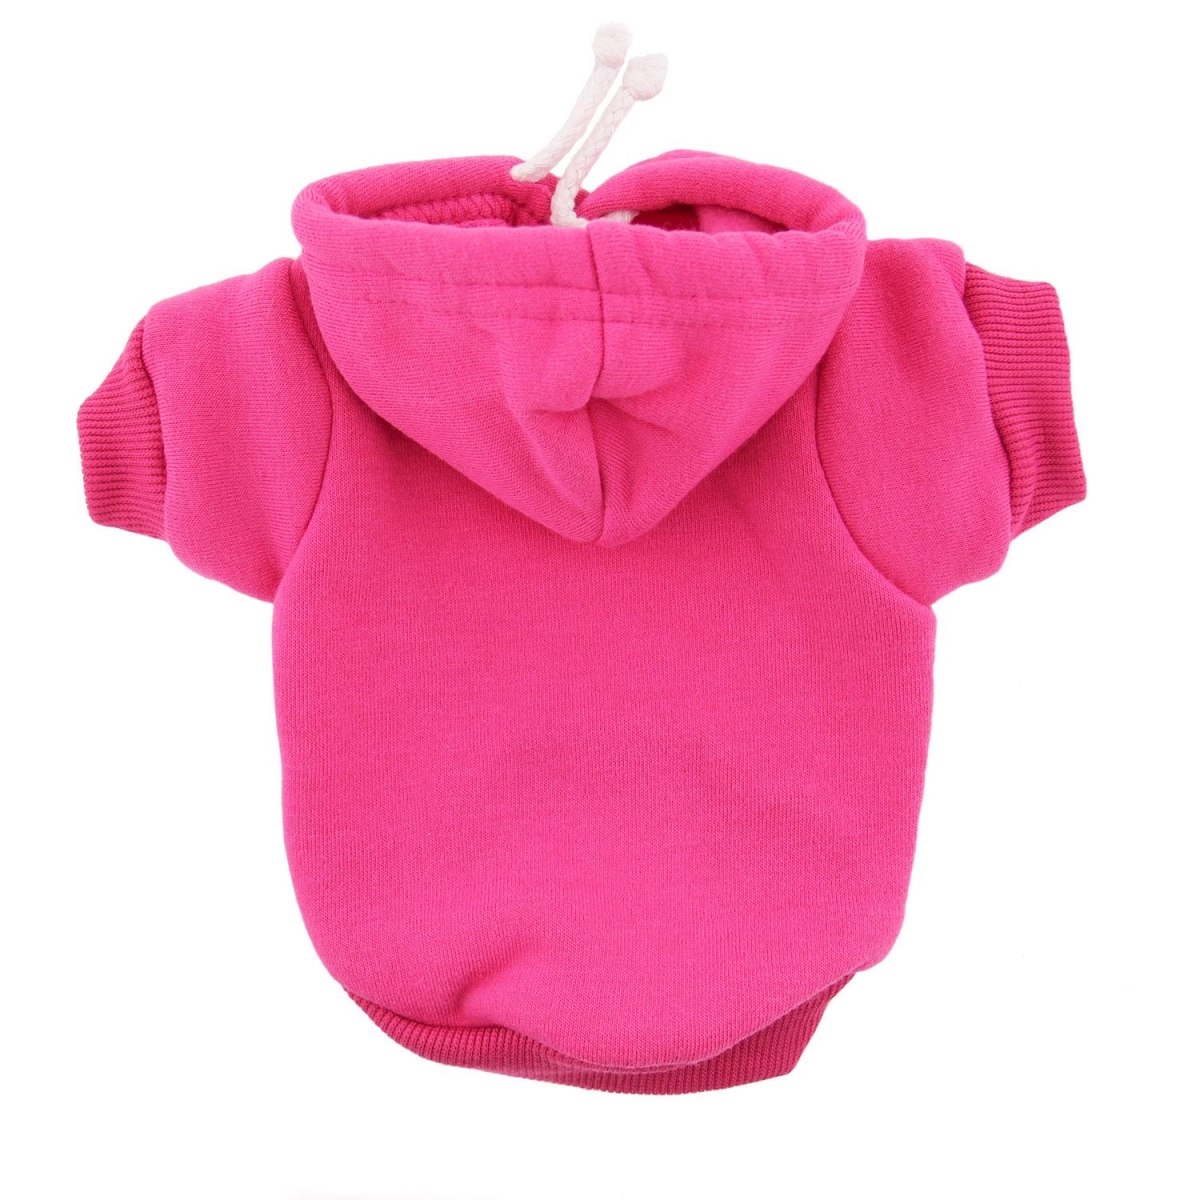 Plain Dog Hoodie, Bright Pink - Extra Large